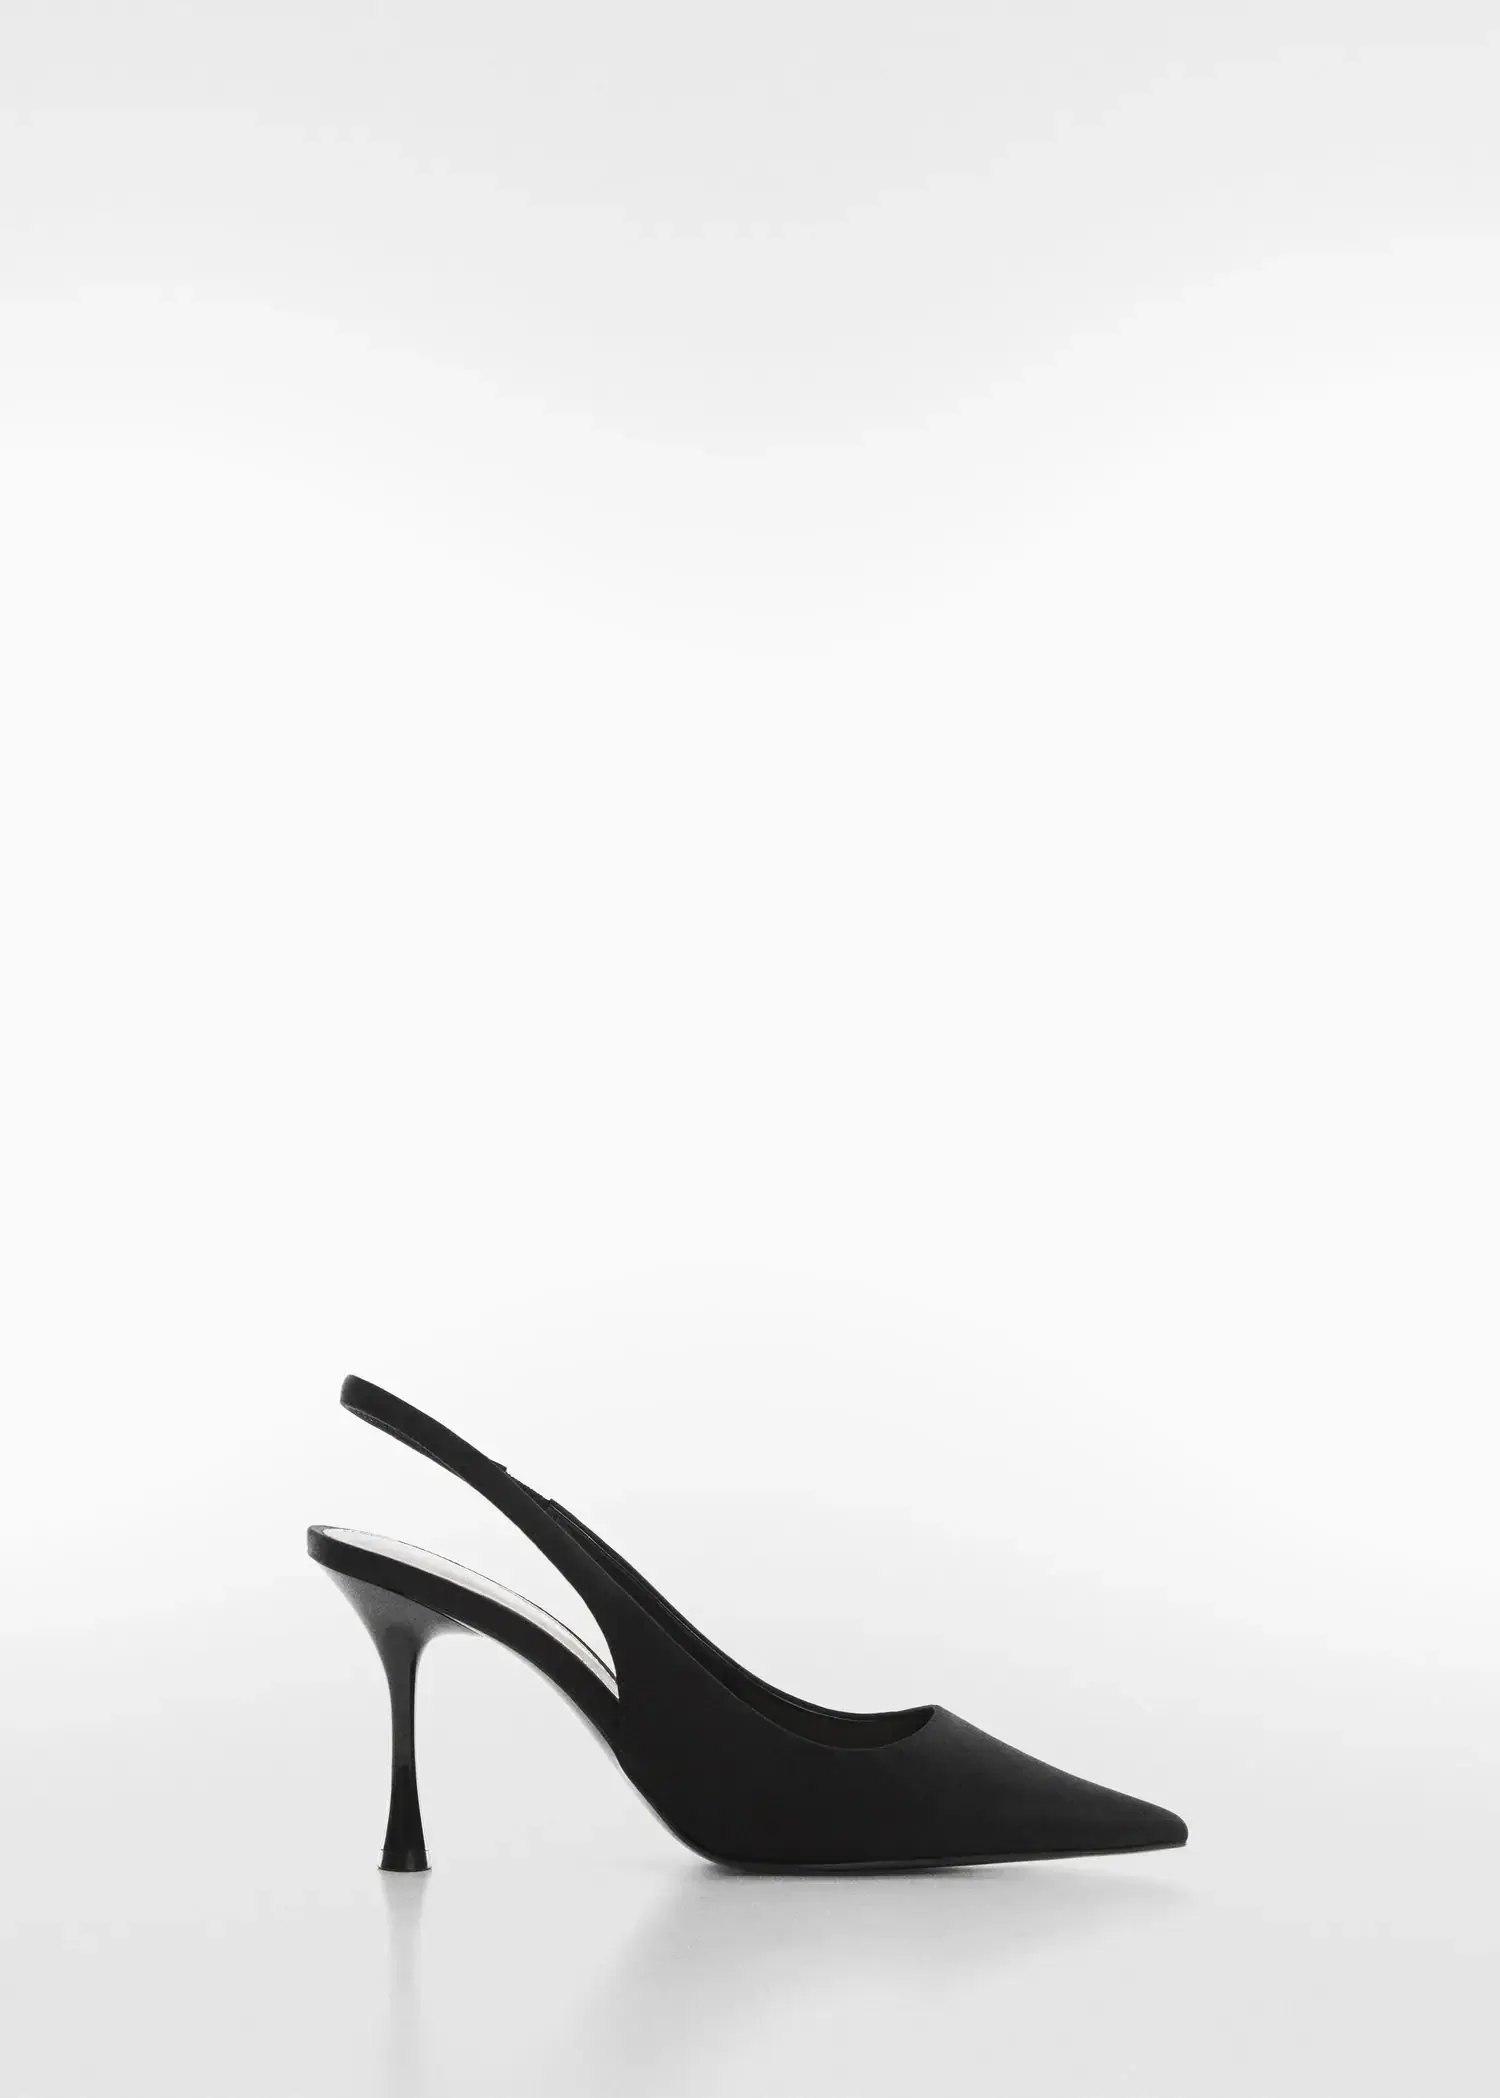 Mango High-heeled shoes. a pair of black high heels on a white background. 